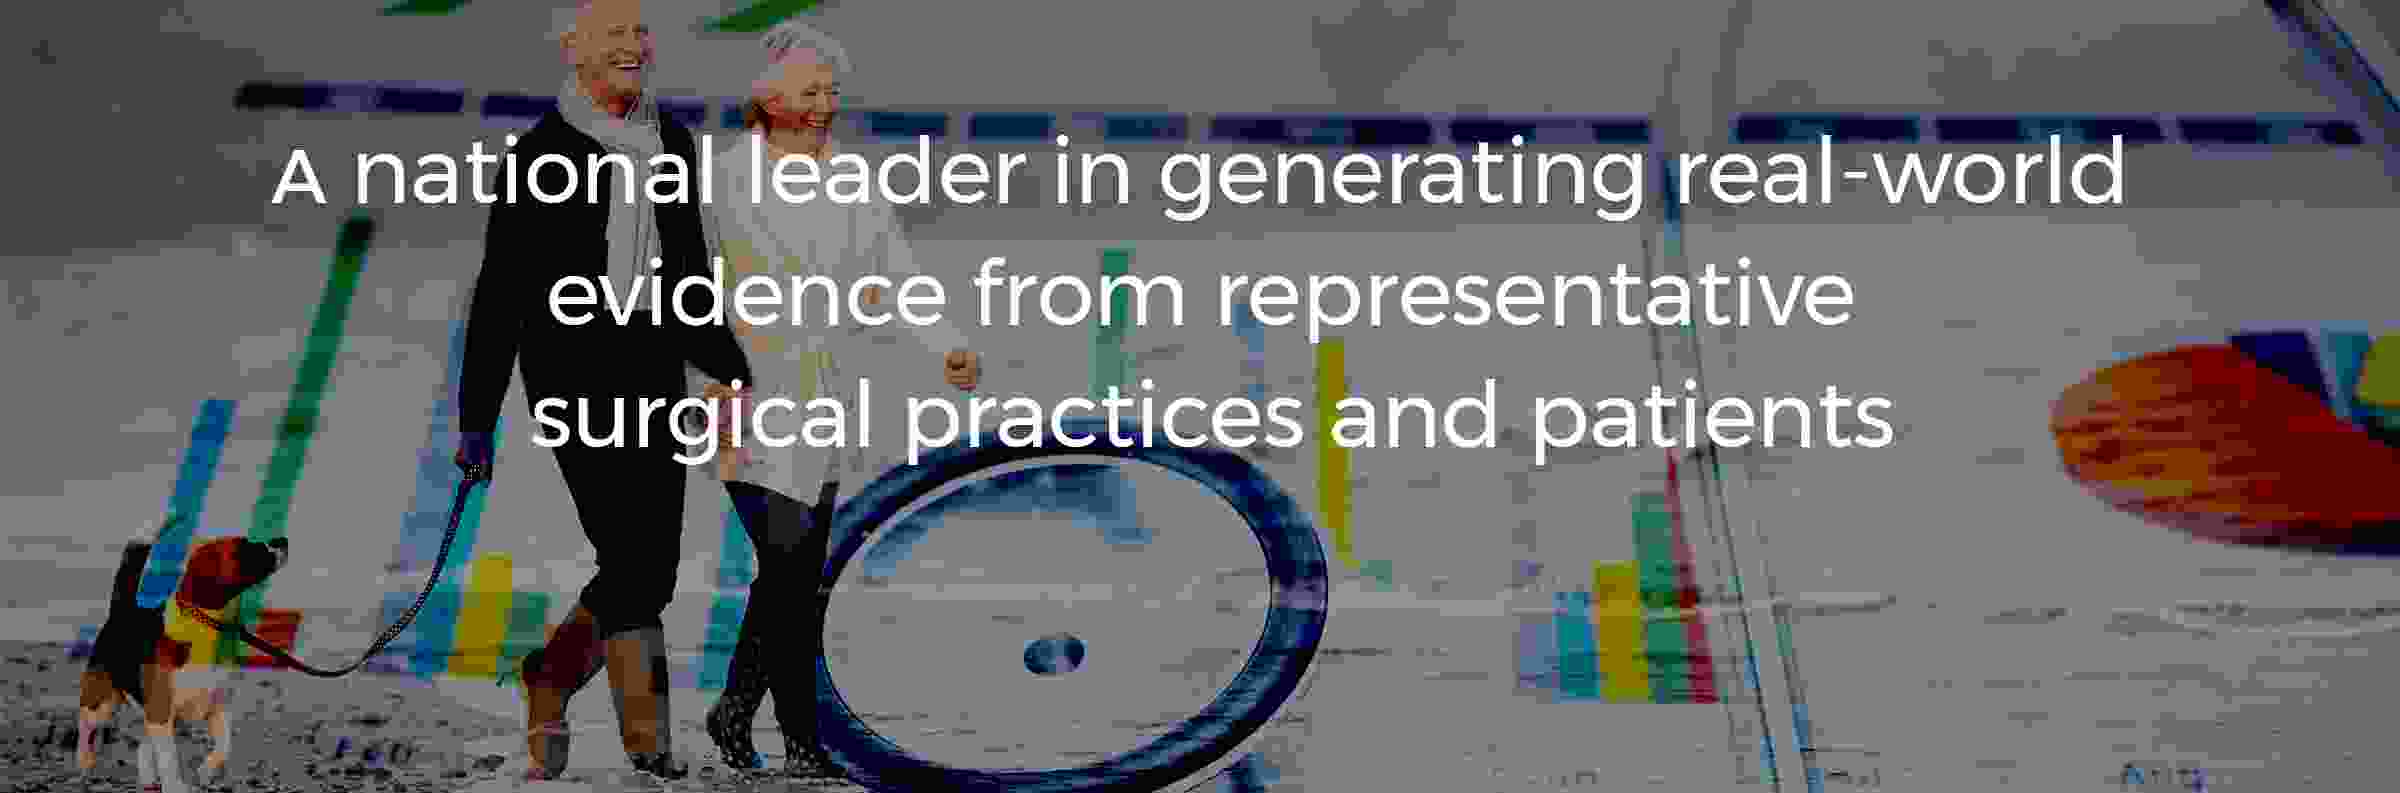 text on image background reads: A national leader in generating real-world evidence from representative surgical practices and patients